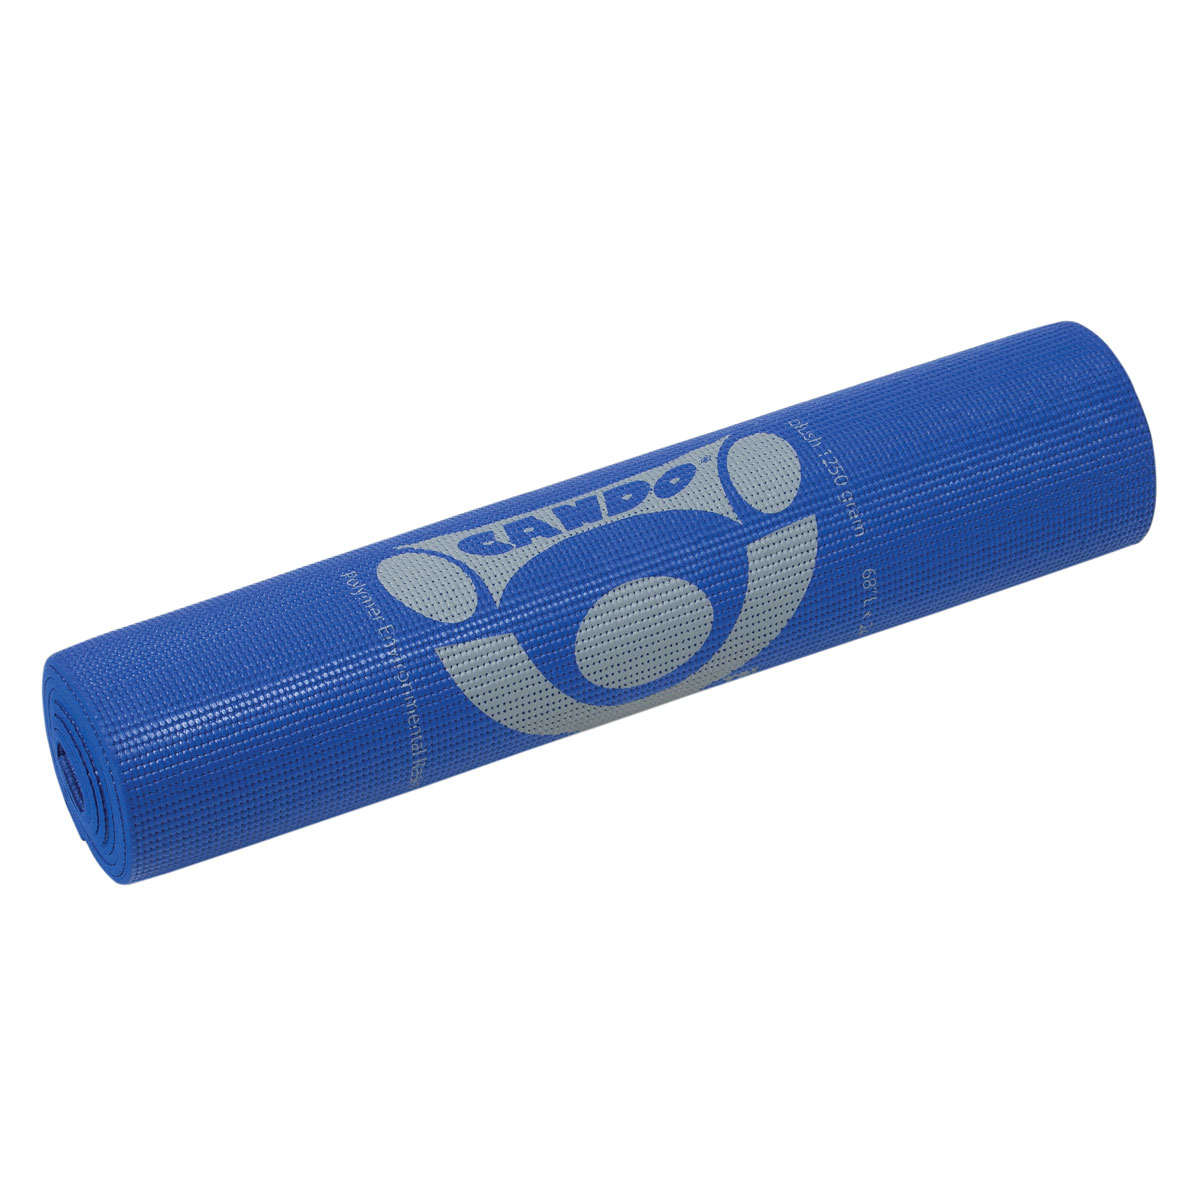 68 x 0.12 x 24 inches Fitness Yoga Mat Blue, 